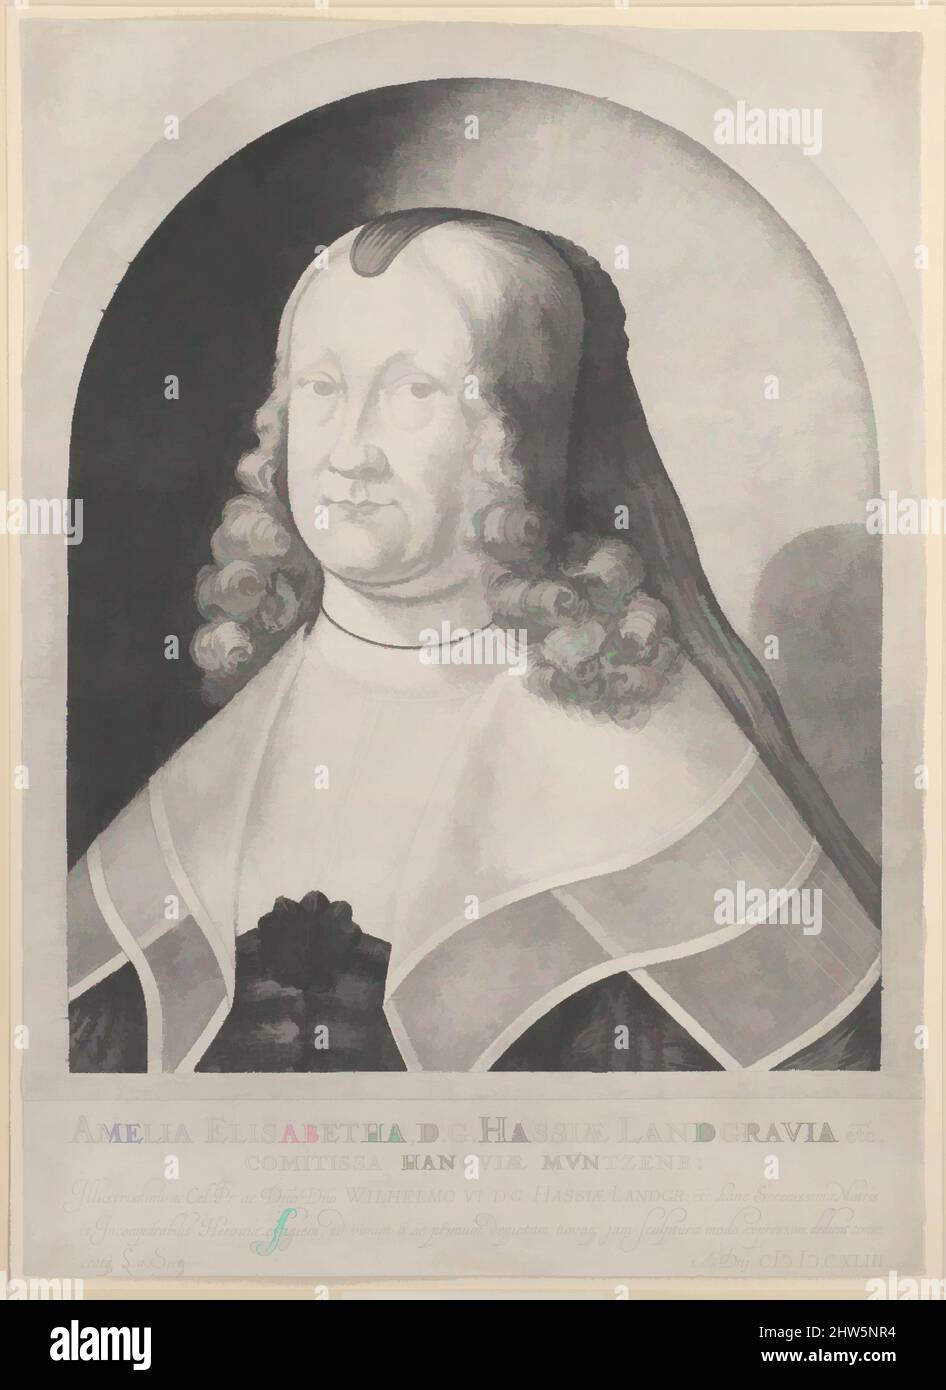 Art inspired by Amelia Elizabeth, Landgravine of Hesse, 17th century, Mezzotint; first state, Sheet: 16 7/16 x 11 15/16 in. (41.8 x 30.3 cm), Prints, Ludwig von Siegen (German, 1609–after 1676), This accomplished portrait ranks as the first mezzotint ever made. Siegen sent it to the, Classic works modernized by Artotop with a splash of modernity. Shapes, color and value, eye-catching visual impact on art. Emotions through freedom of artworks in a contemporary way. A timeless message pursuing a wildly creative new direction. Artists turning to the digital medium and creating the Artotop NFT Stock Photo